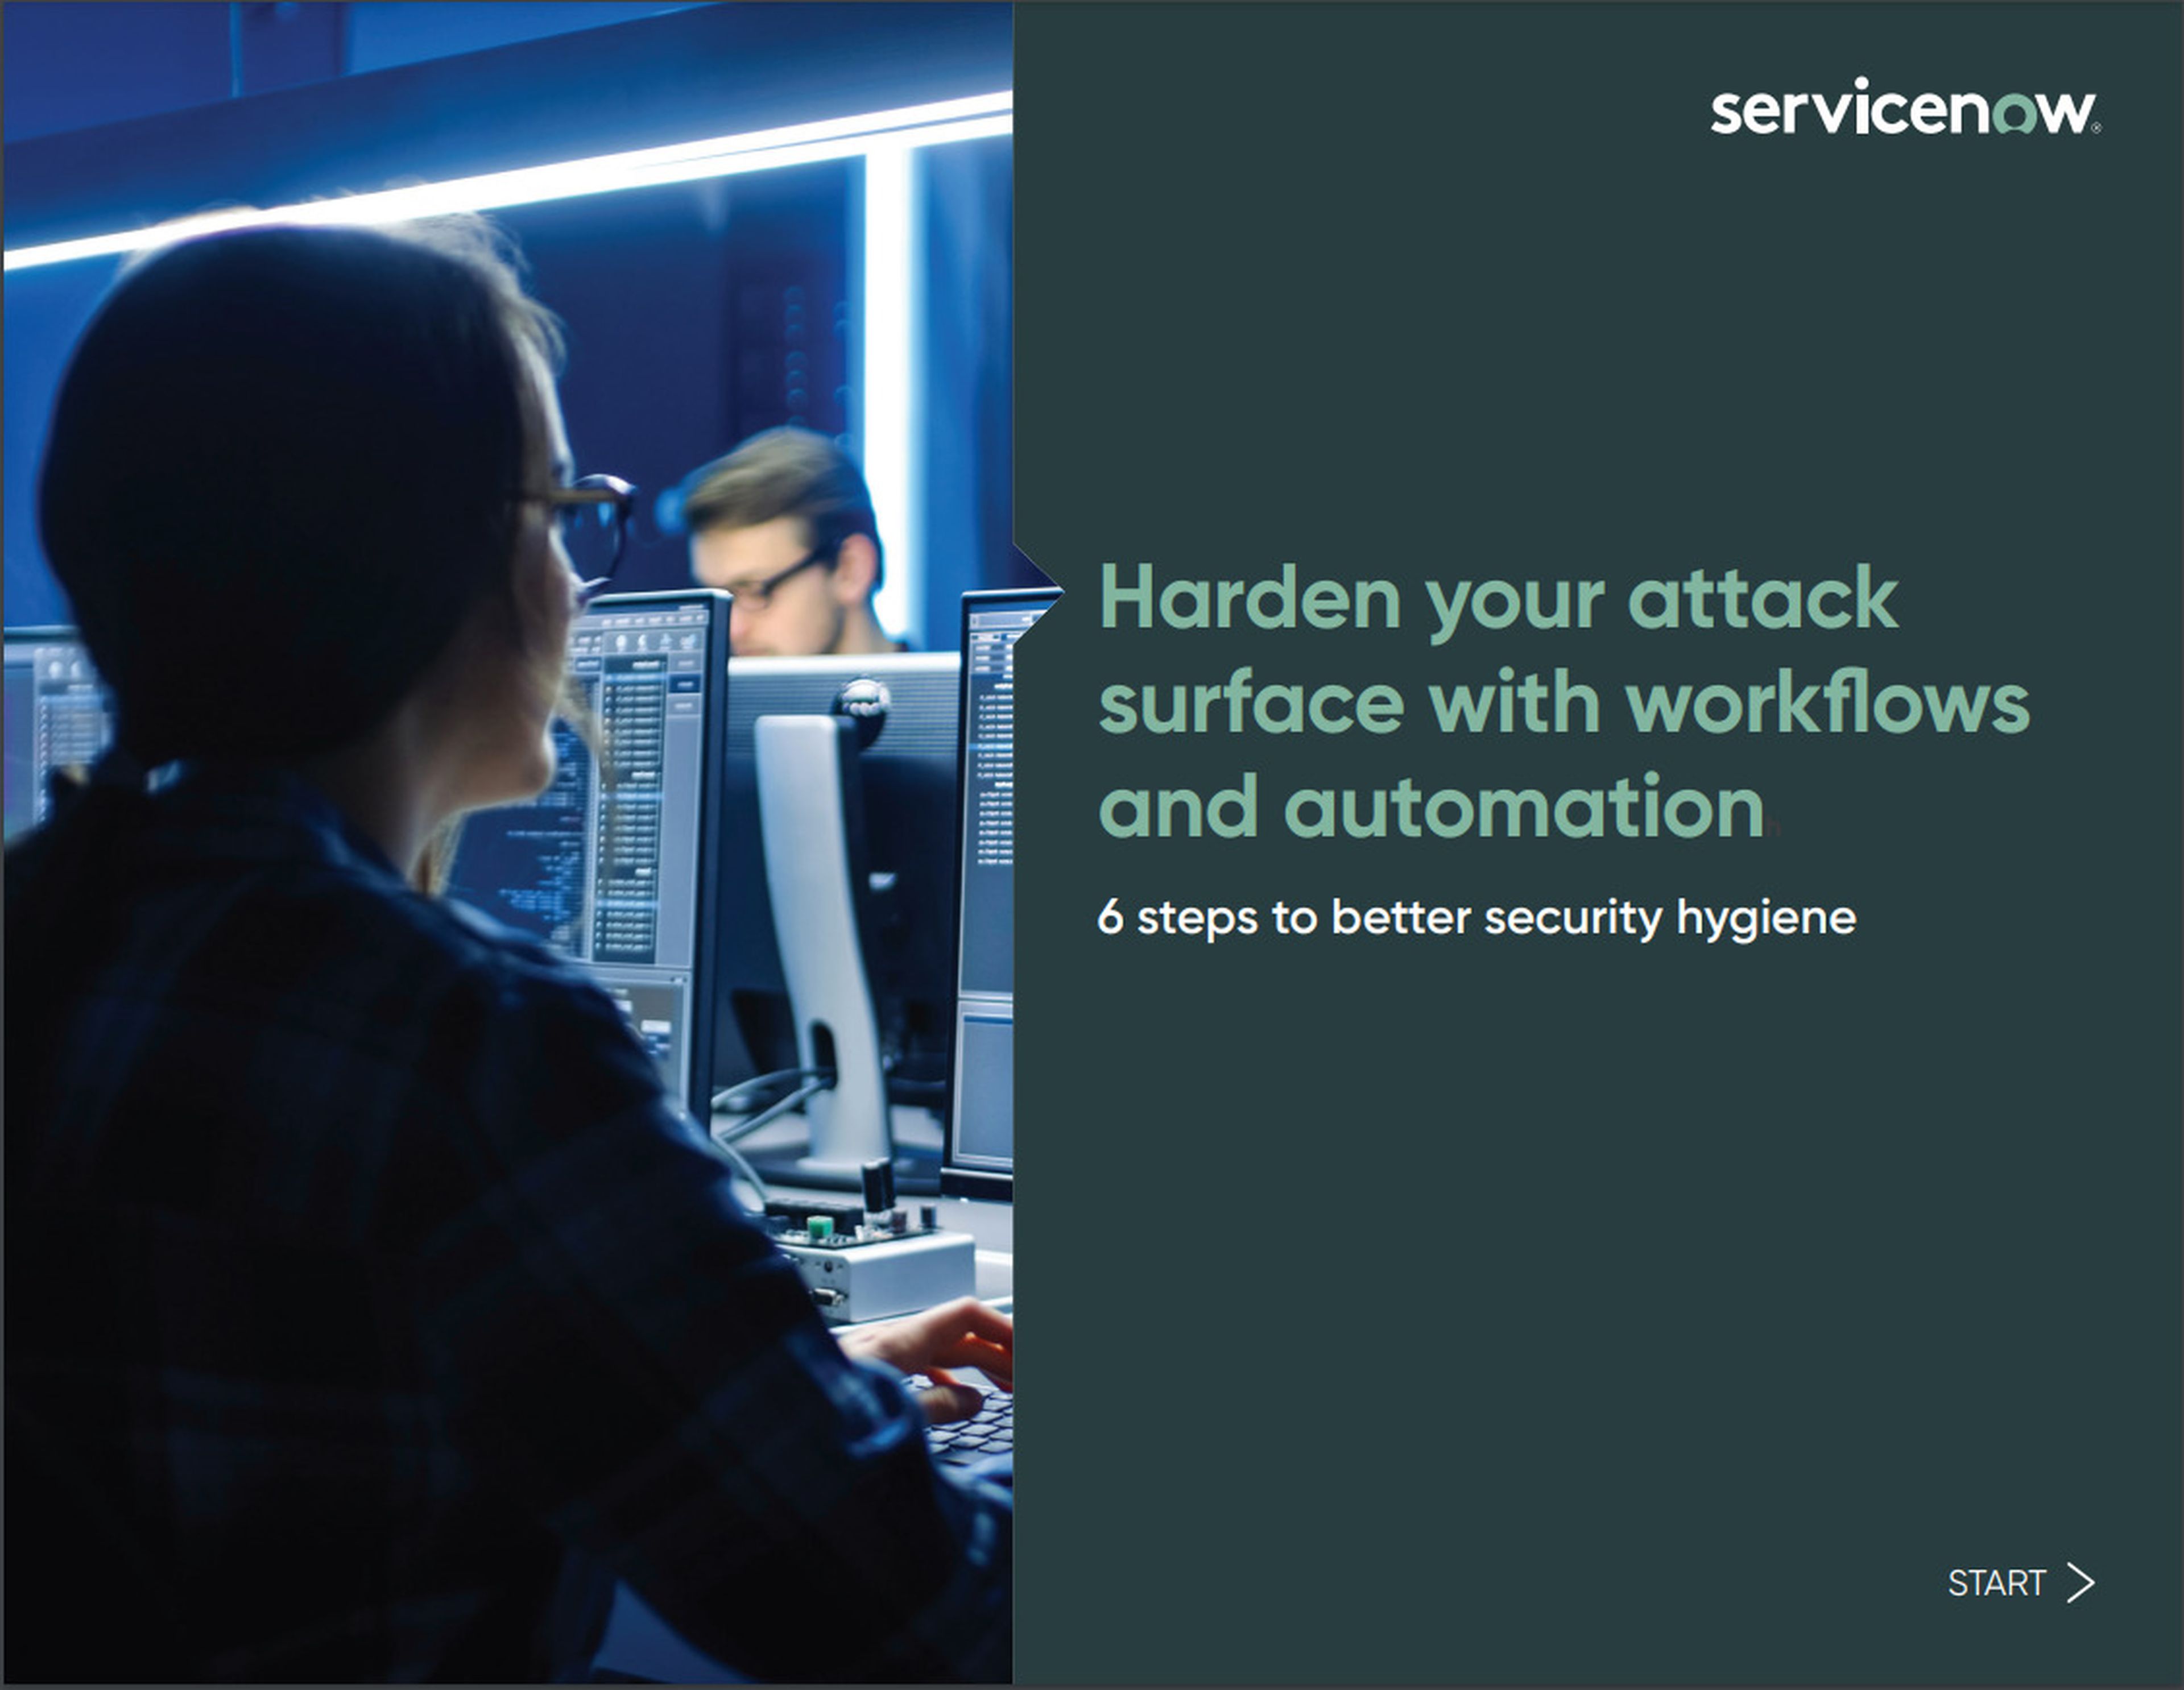 Harden Your Attack Surface with Workflows and Automation: 6 Steps to Better Security Hygiene